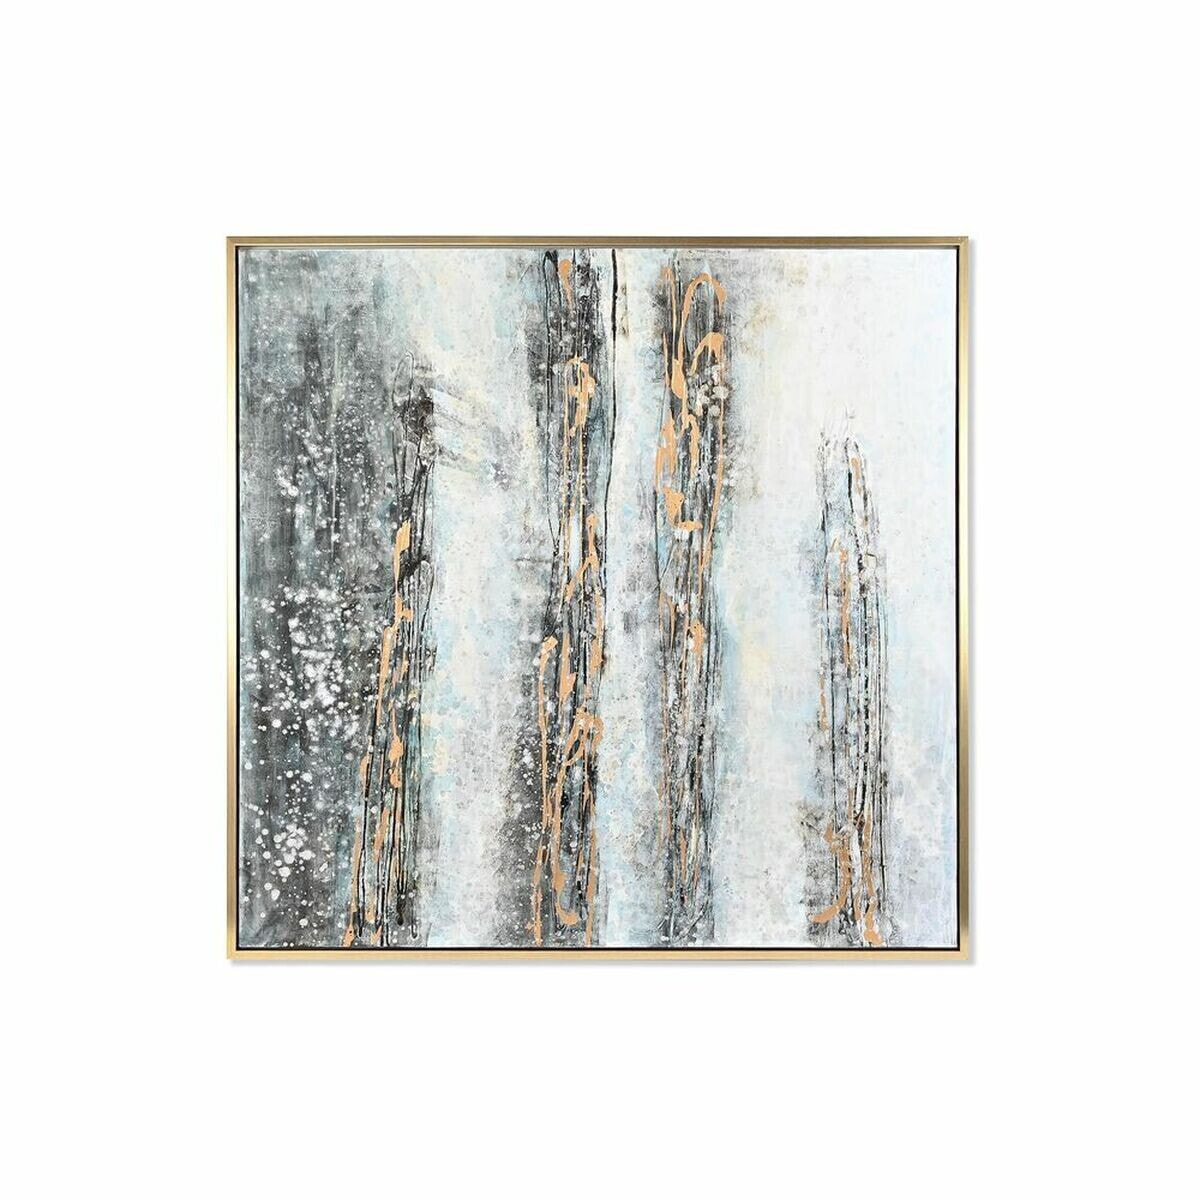 Painting DKD Home Decor Abstract Urban 131 x 4 x 131 cm